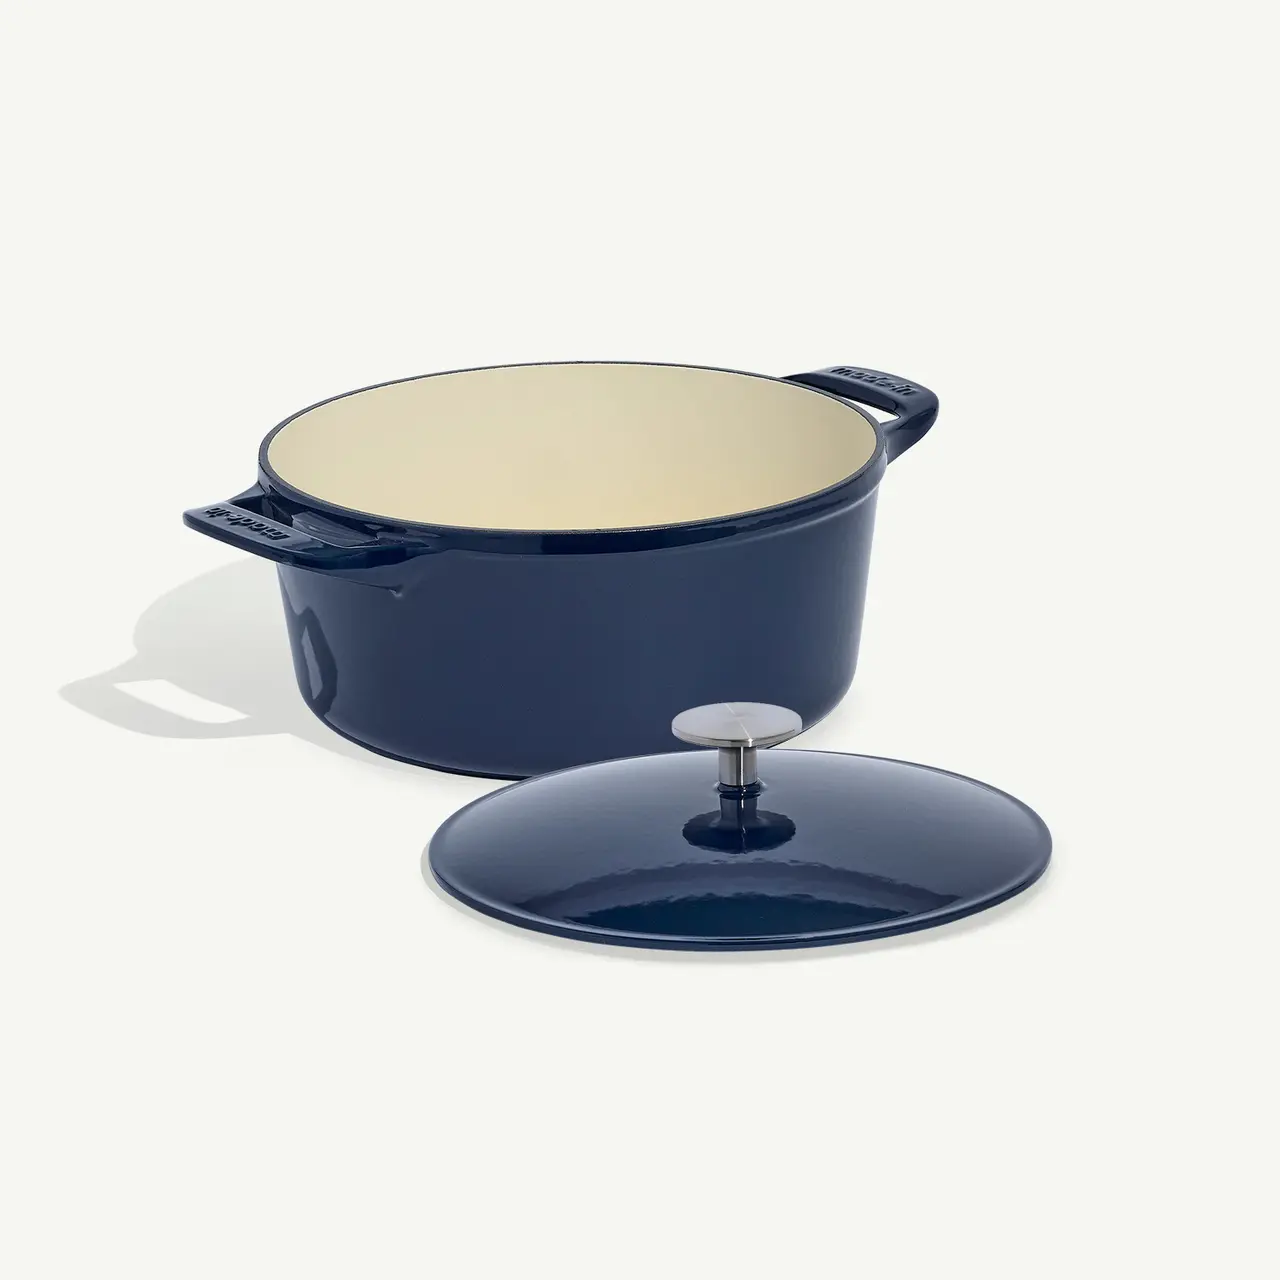 A navy blue dutch oven with its lid off to the side on a light background.